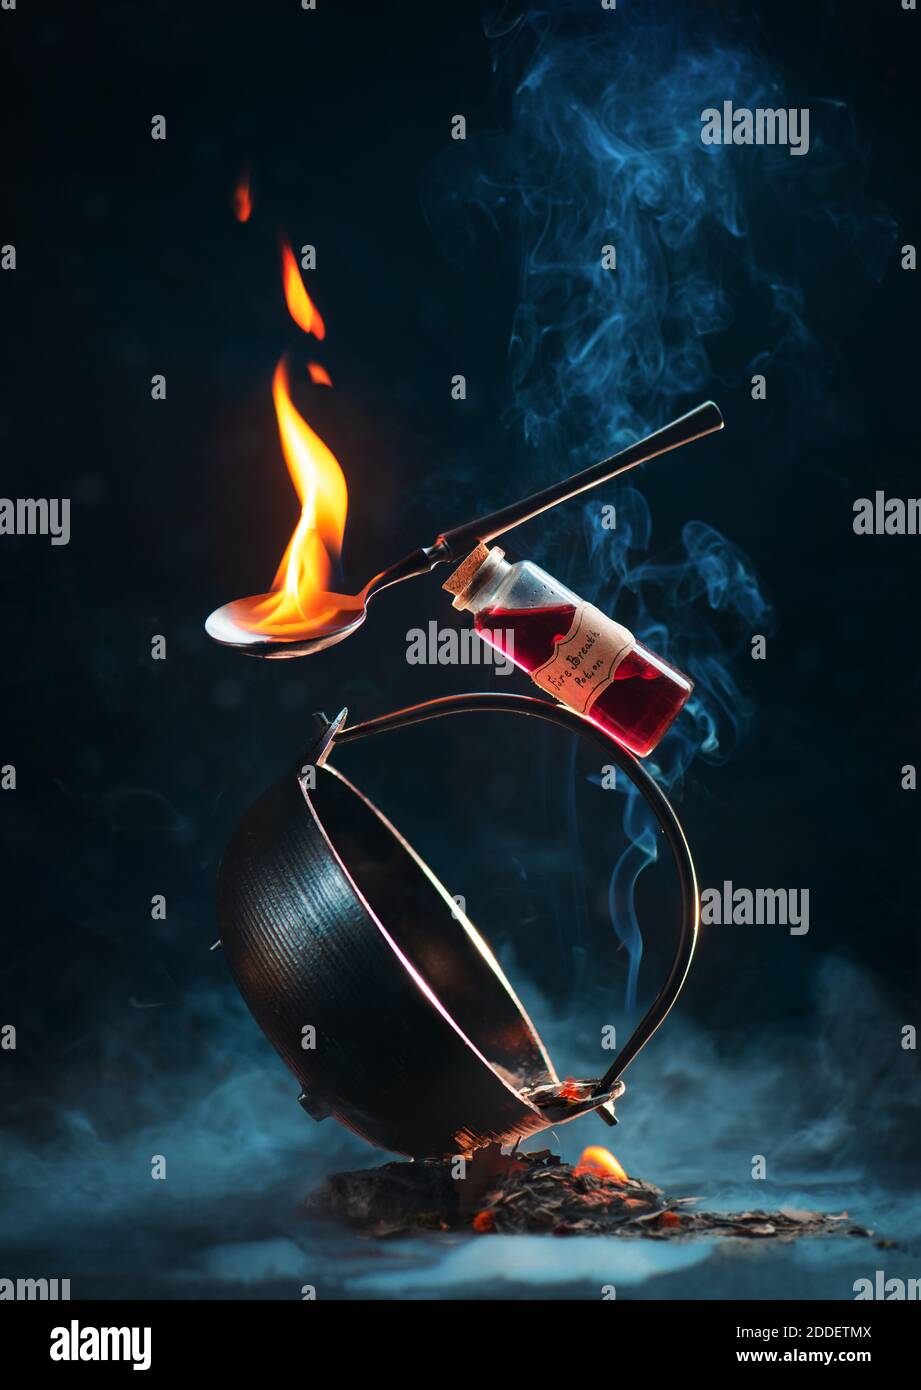 Cauldron, fire potion and a soon with flame in a balancing composition with smoke, fantasy book cover Stock Photo